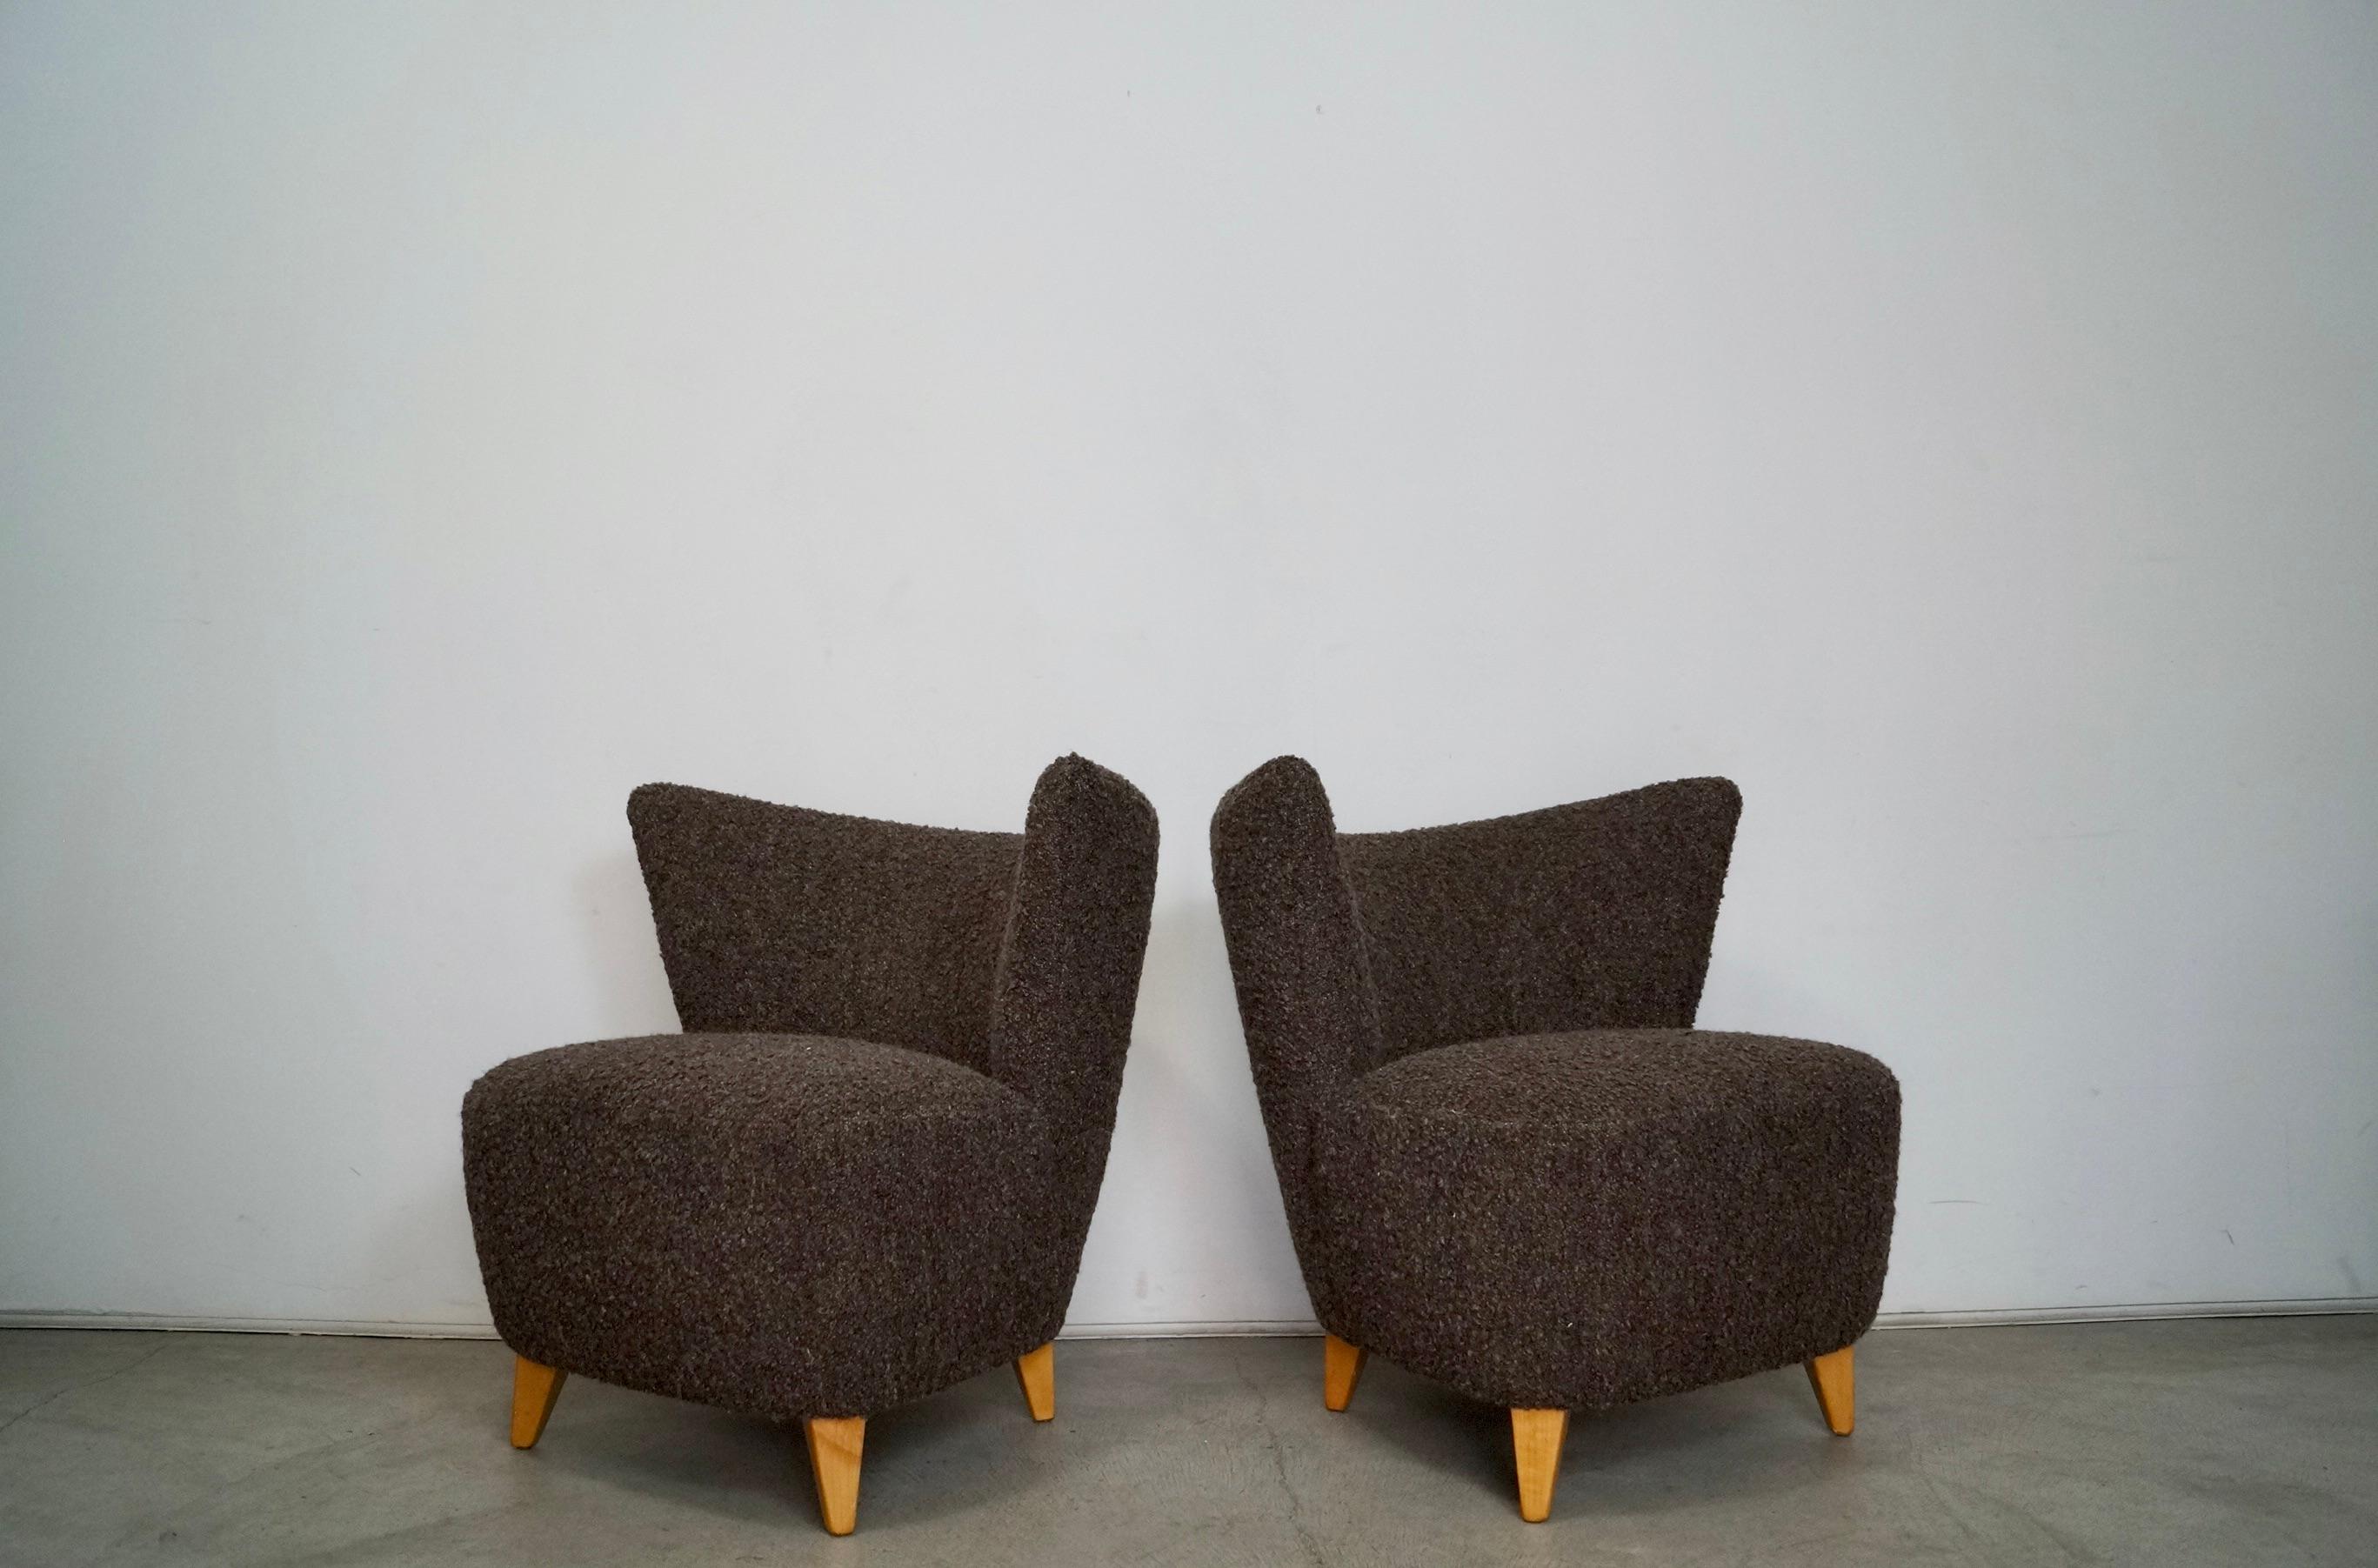 Pair of original Art Deco Midcentury Modern lounge chairs for sale. They have been professionally restored and are now in showroom condition. The legs are solid birch and have been refinished in a natural birch finish. They were professionally